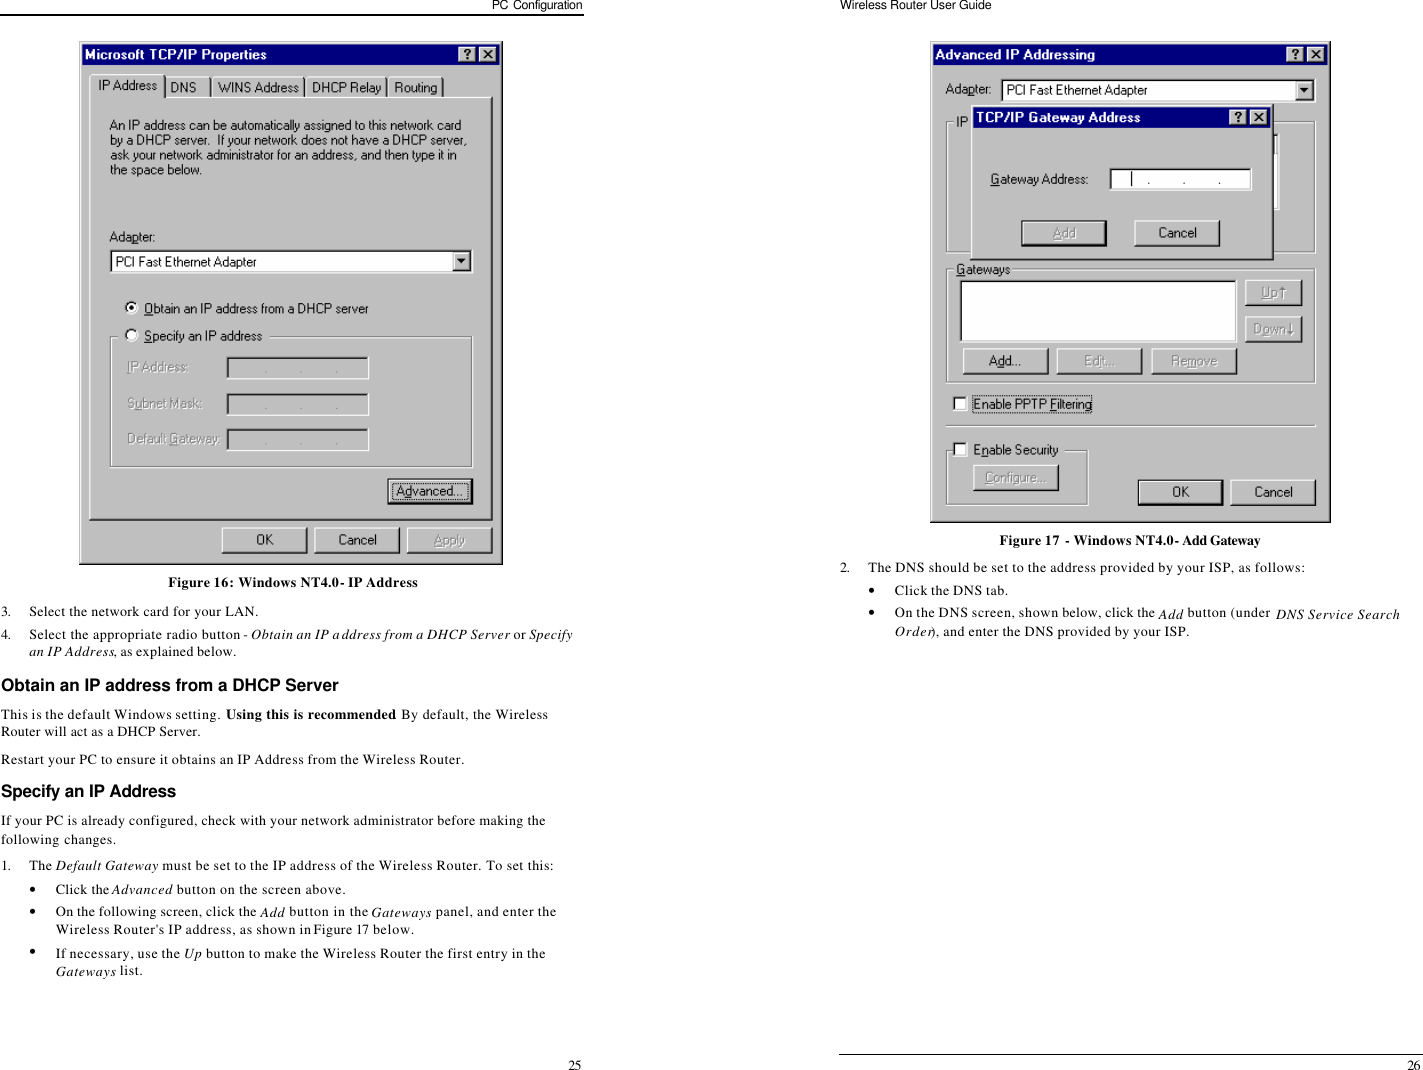 PC Configuration 25  Figure 16: Windows NT4.0 - IP Address 3. Select the network card for your LAN. 4. Select the appropriate radio button - Obtain an IP address from a DHCP Server or Specify an IP Address, as explained below. Obtain an IP address from a DHCP Server This is the default Windows setting. Using this is recommended. By default, the Wireless Router will act as a DHCP Server. Restart your PC to ensure it obtains an IP Address from the Wireless Router. Specify an IP Address If your PC is already configured, check with your network administrator before making the following changes. 1. The Default Gateway must be set to the IP address of the Wireless Router. To set this: • Click the Advanced button on the screen above. • On the following screen, click the Add button in the Gateways panel, and enter the Wireless Router&apos;s IP address, as shown in Figure 17 below. • If necessary, use the Up button to make the Wireless Router the first entry in the Gateways list. Wireless Router User Guide 26  Figure 17 - Windows NT4.0 - Add Gateway 2. The DNS should be set to the address provided by your ISP, as follows: • Click the DNS tab. • On the DNS screen, shown below, click the Add button (under DNS Service Search Order), and enter the DNS provided by your ISP. 